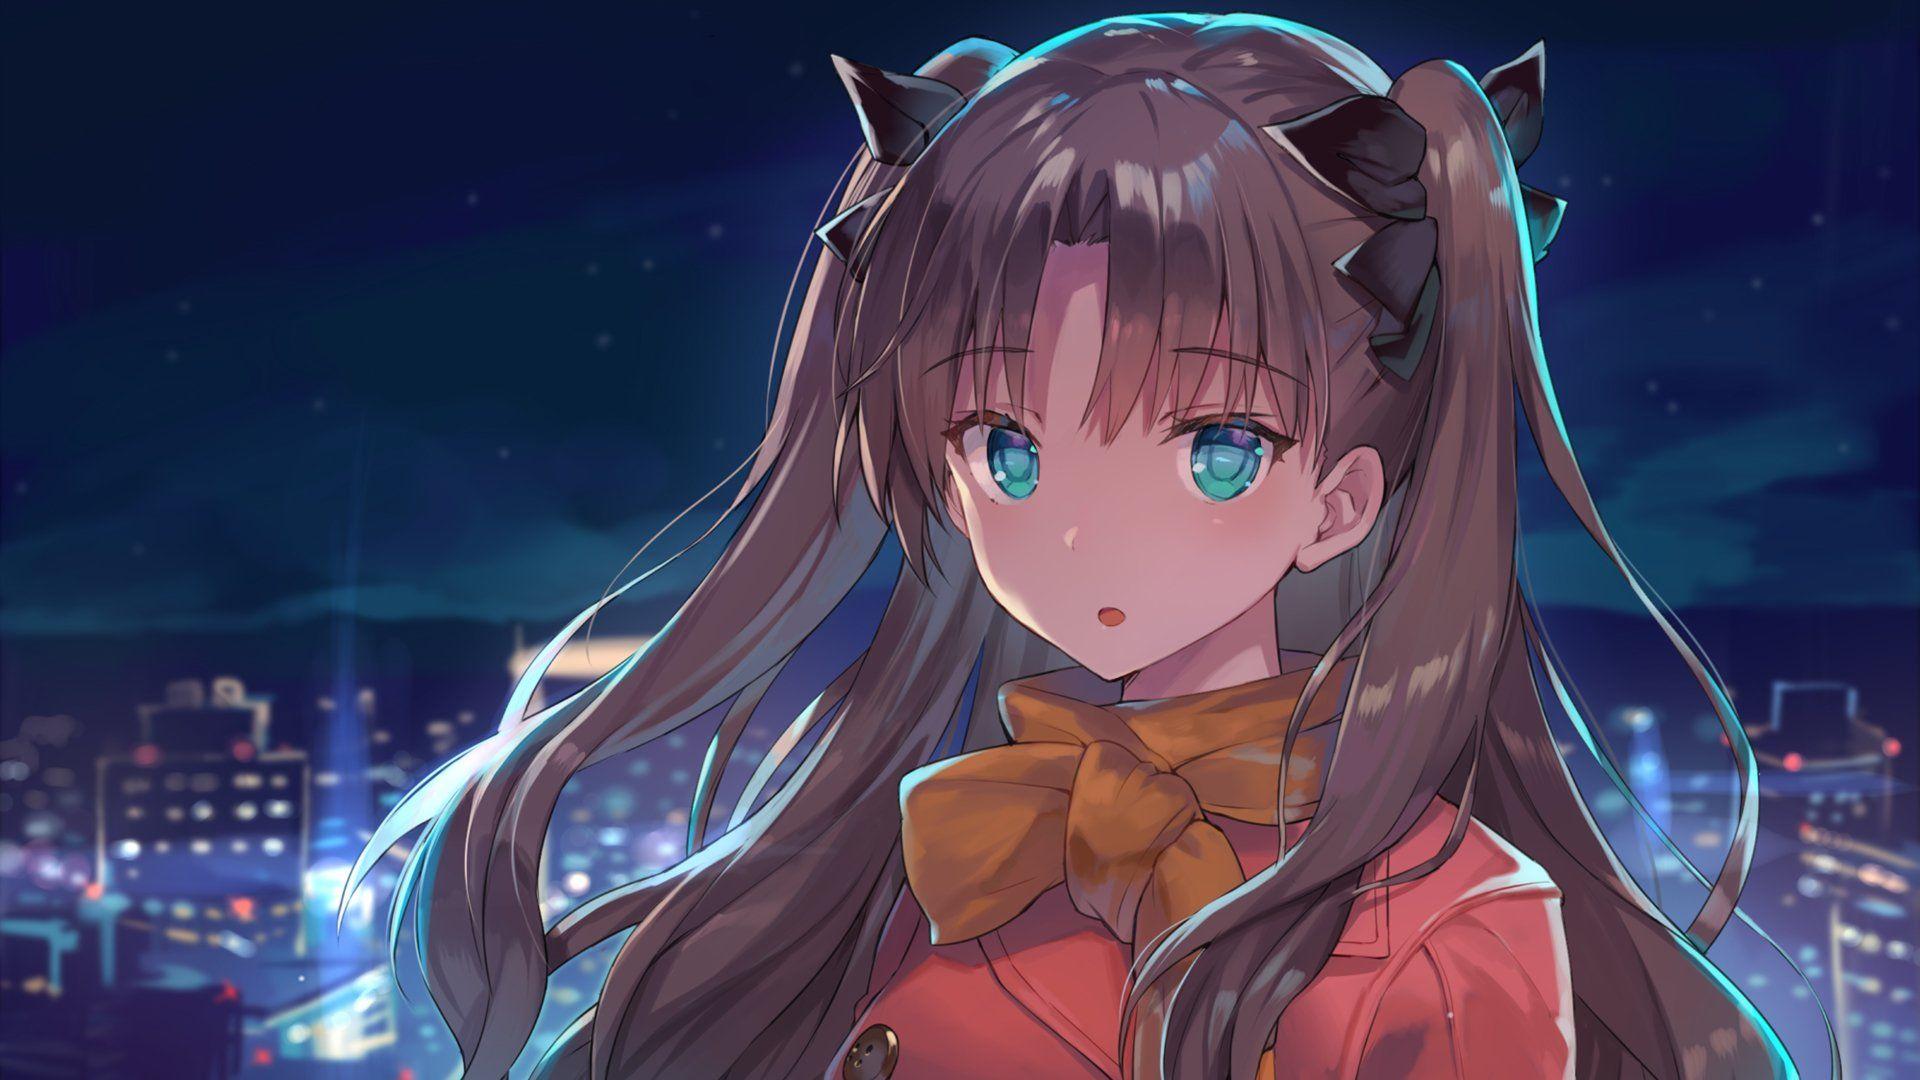 Fate Stay Night: Unlimited Blade Works Tohsaka Wallpaper Background Image. View, Download, Comment, And Rate